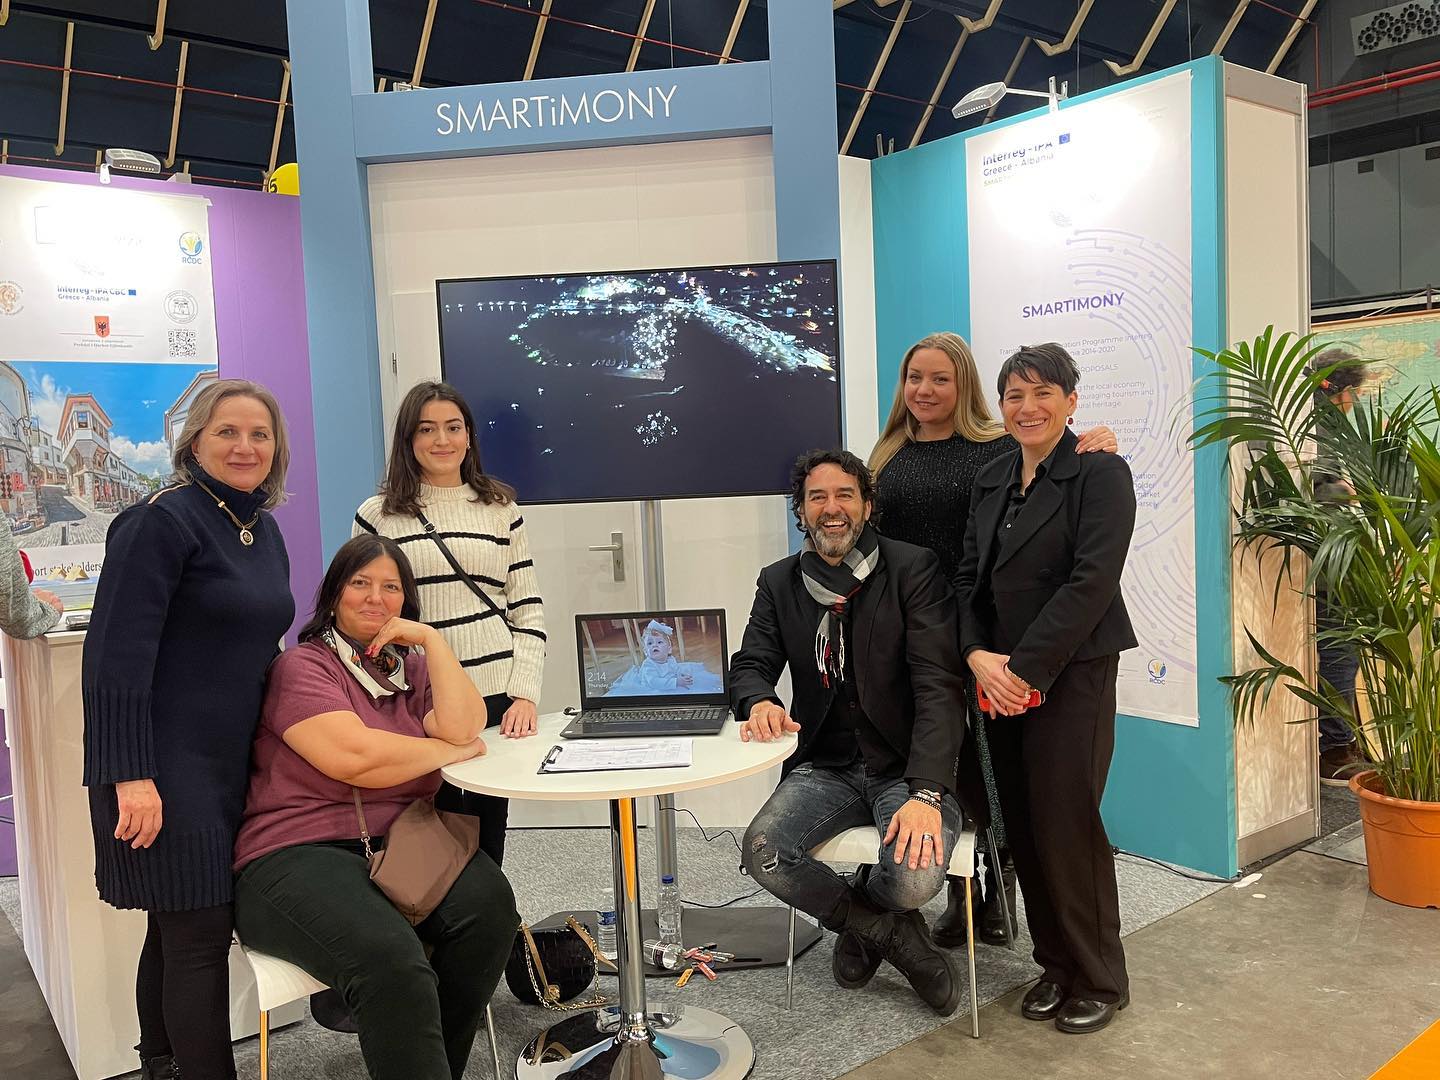 <strong>Dynamic Participation of the SMARTiMONY Project at the International Tourism Exhibition “Vakantiebeurs” in Utrecht, Holland</strong>